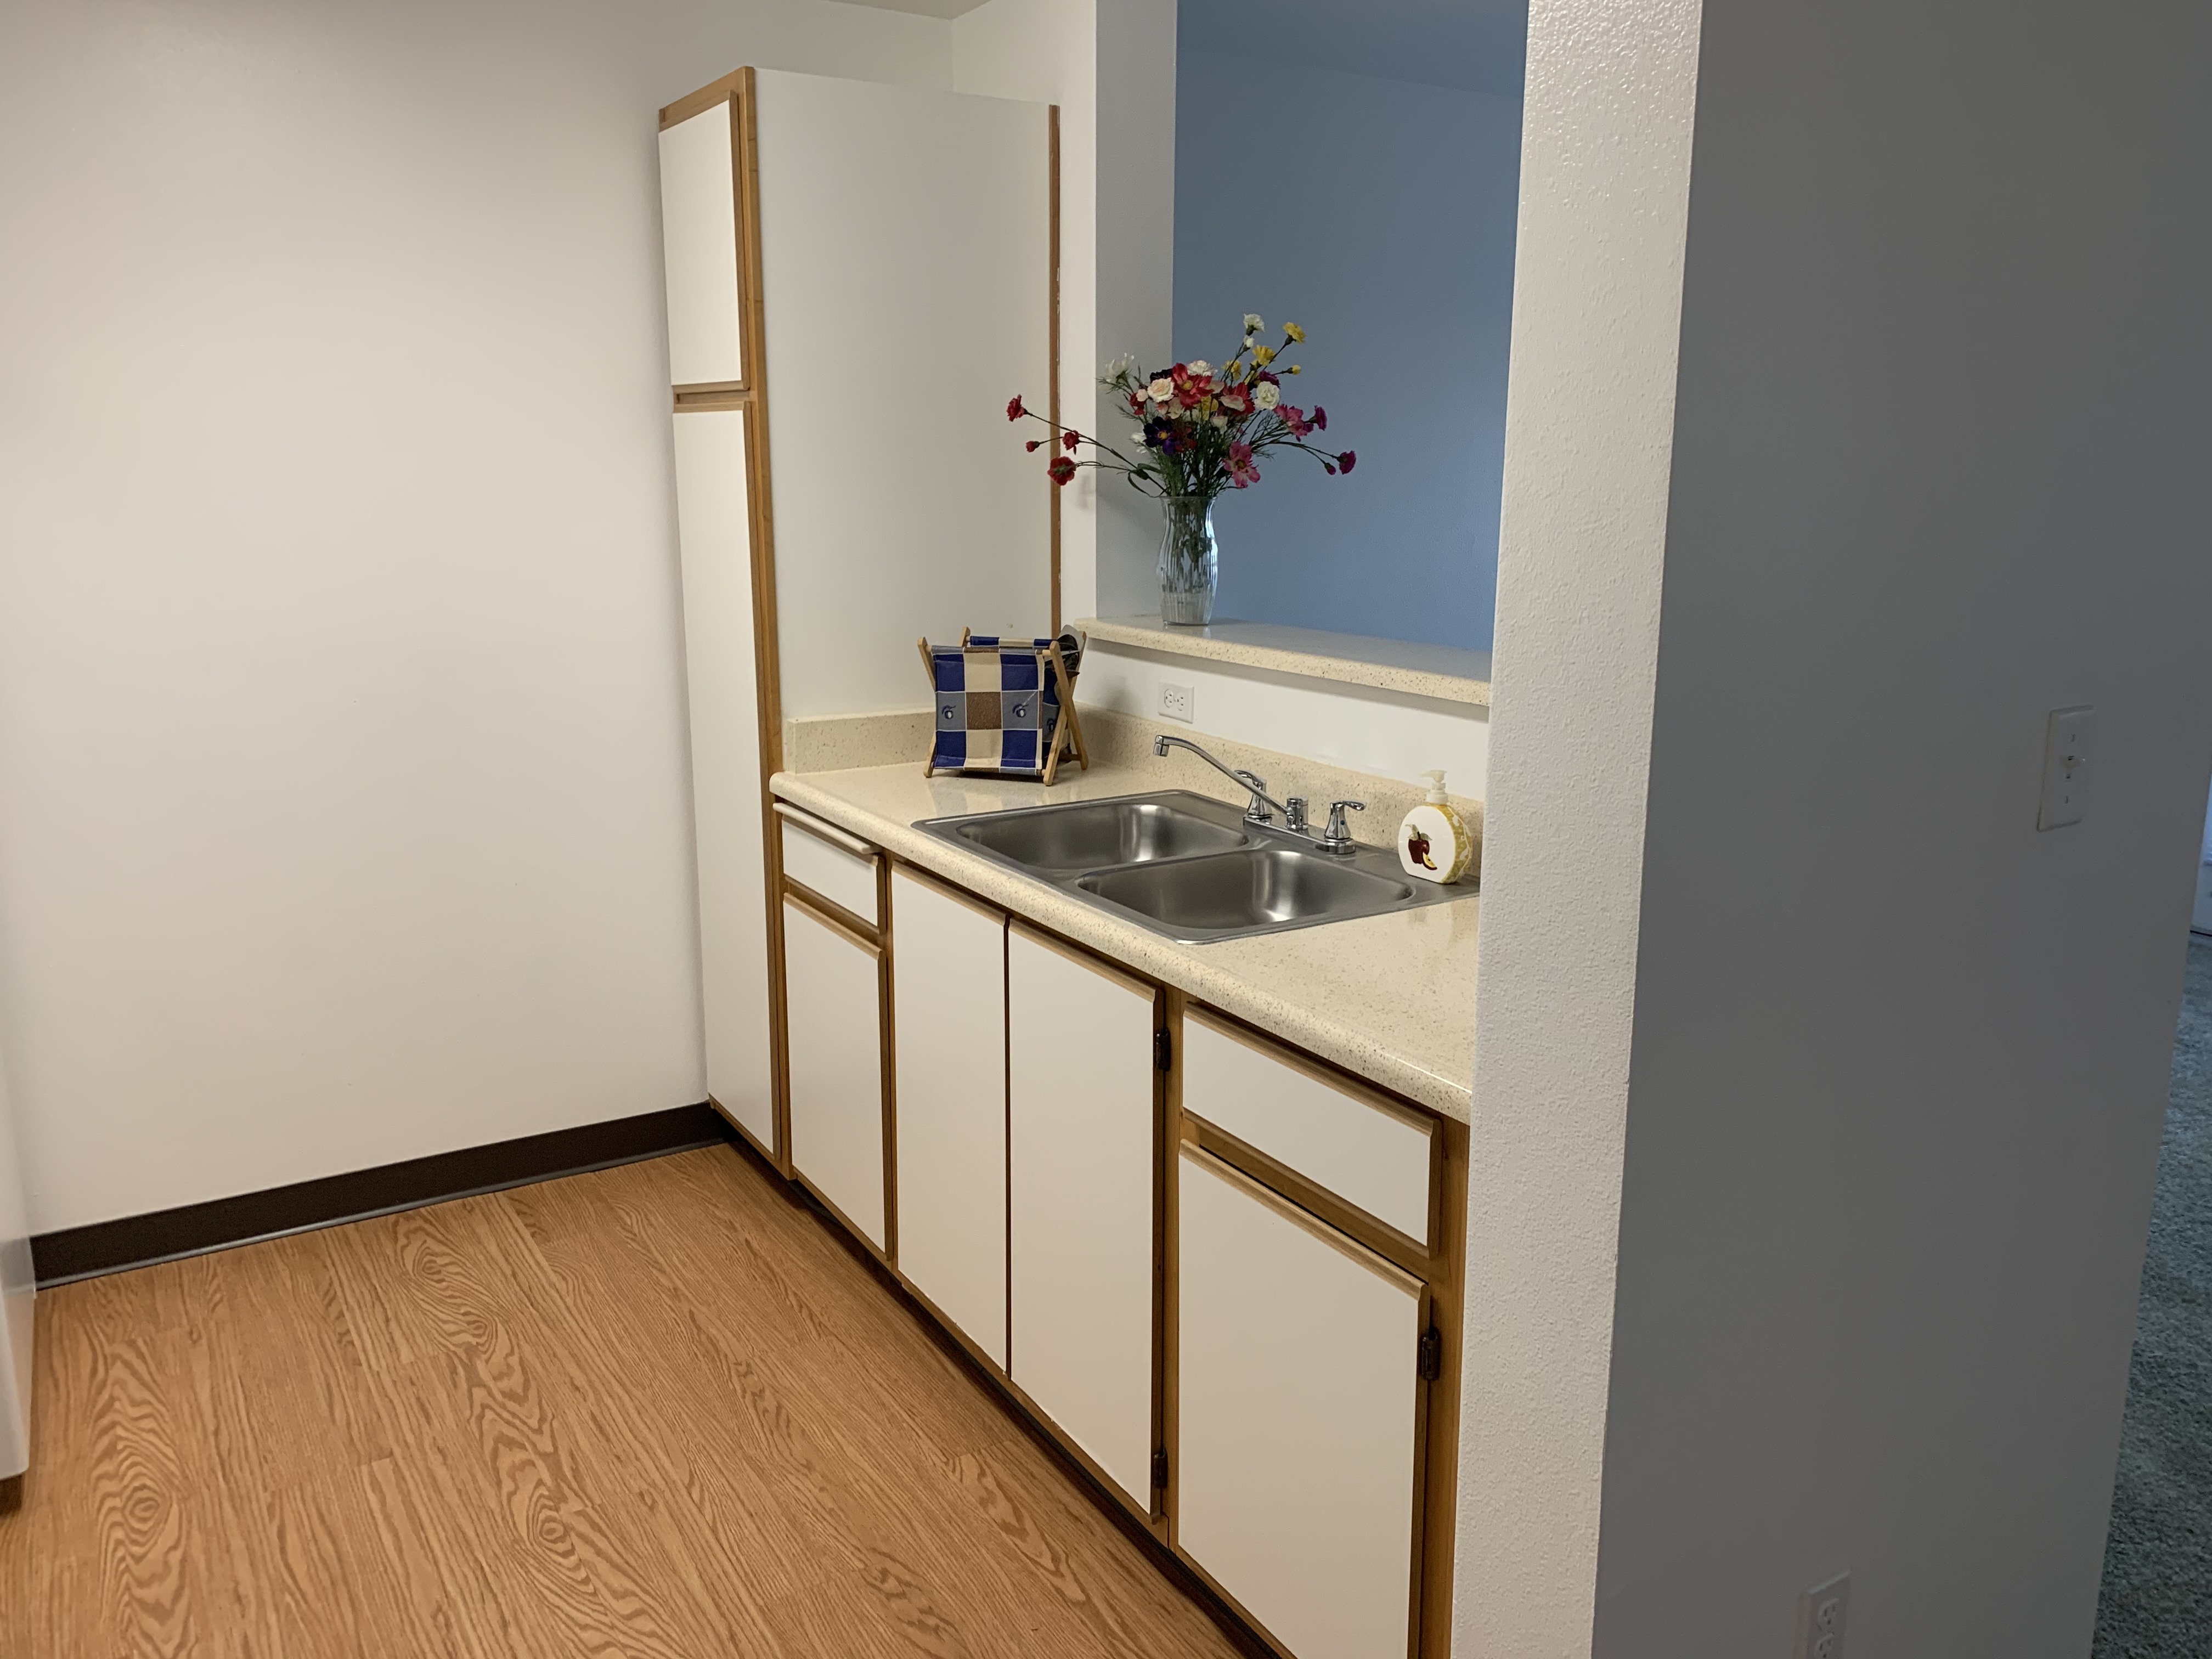 Different angle of a kitchen area. Pictured is the sink, more cabinets and an open window counter.